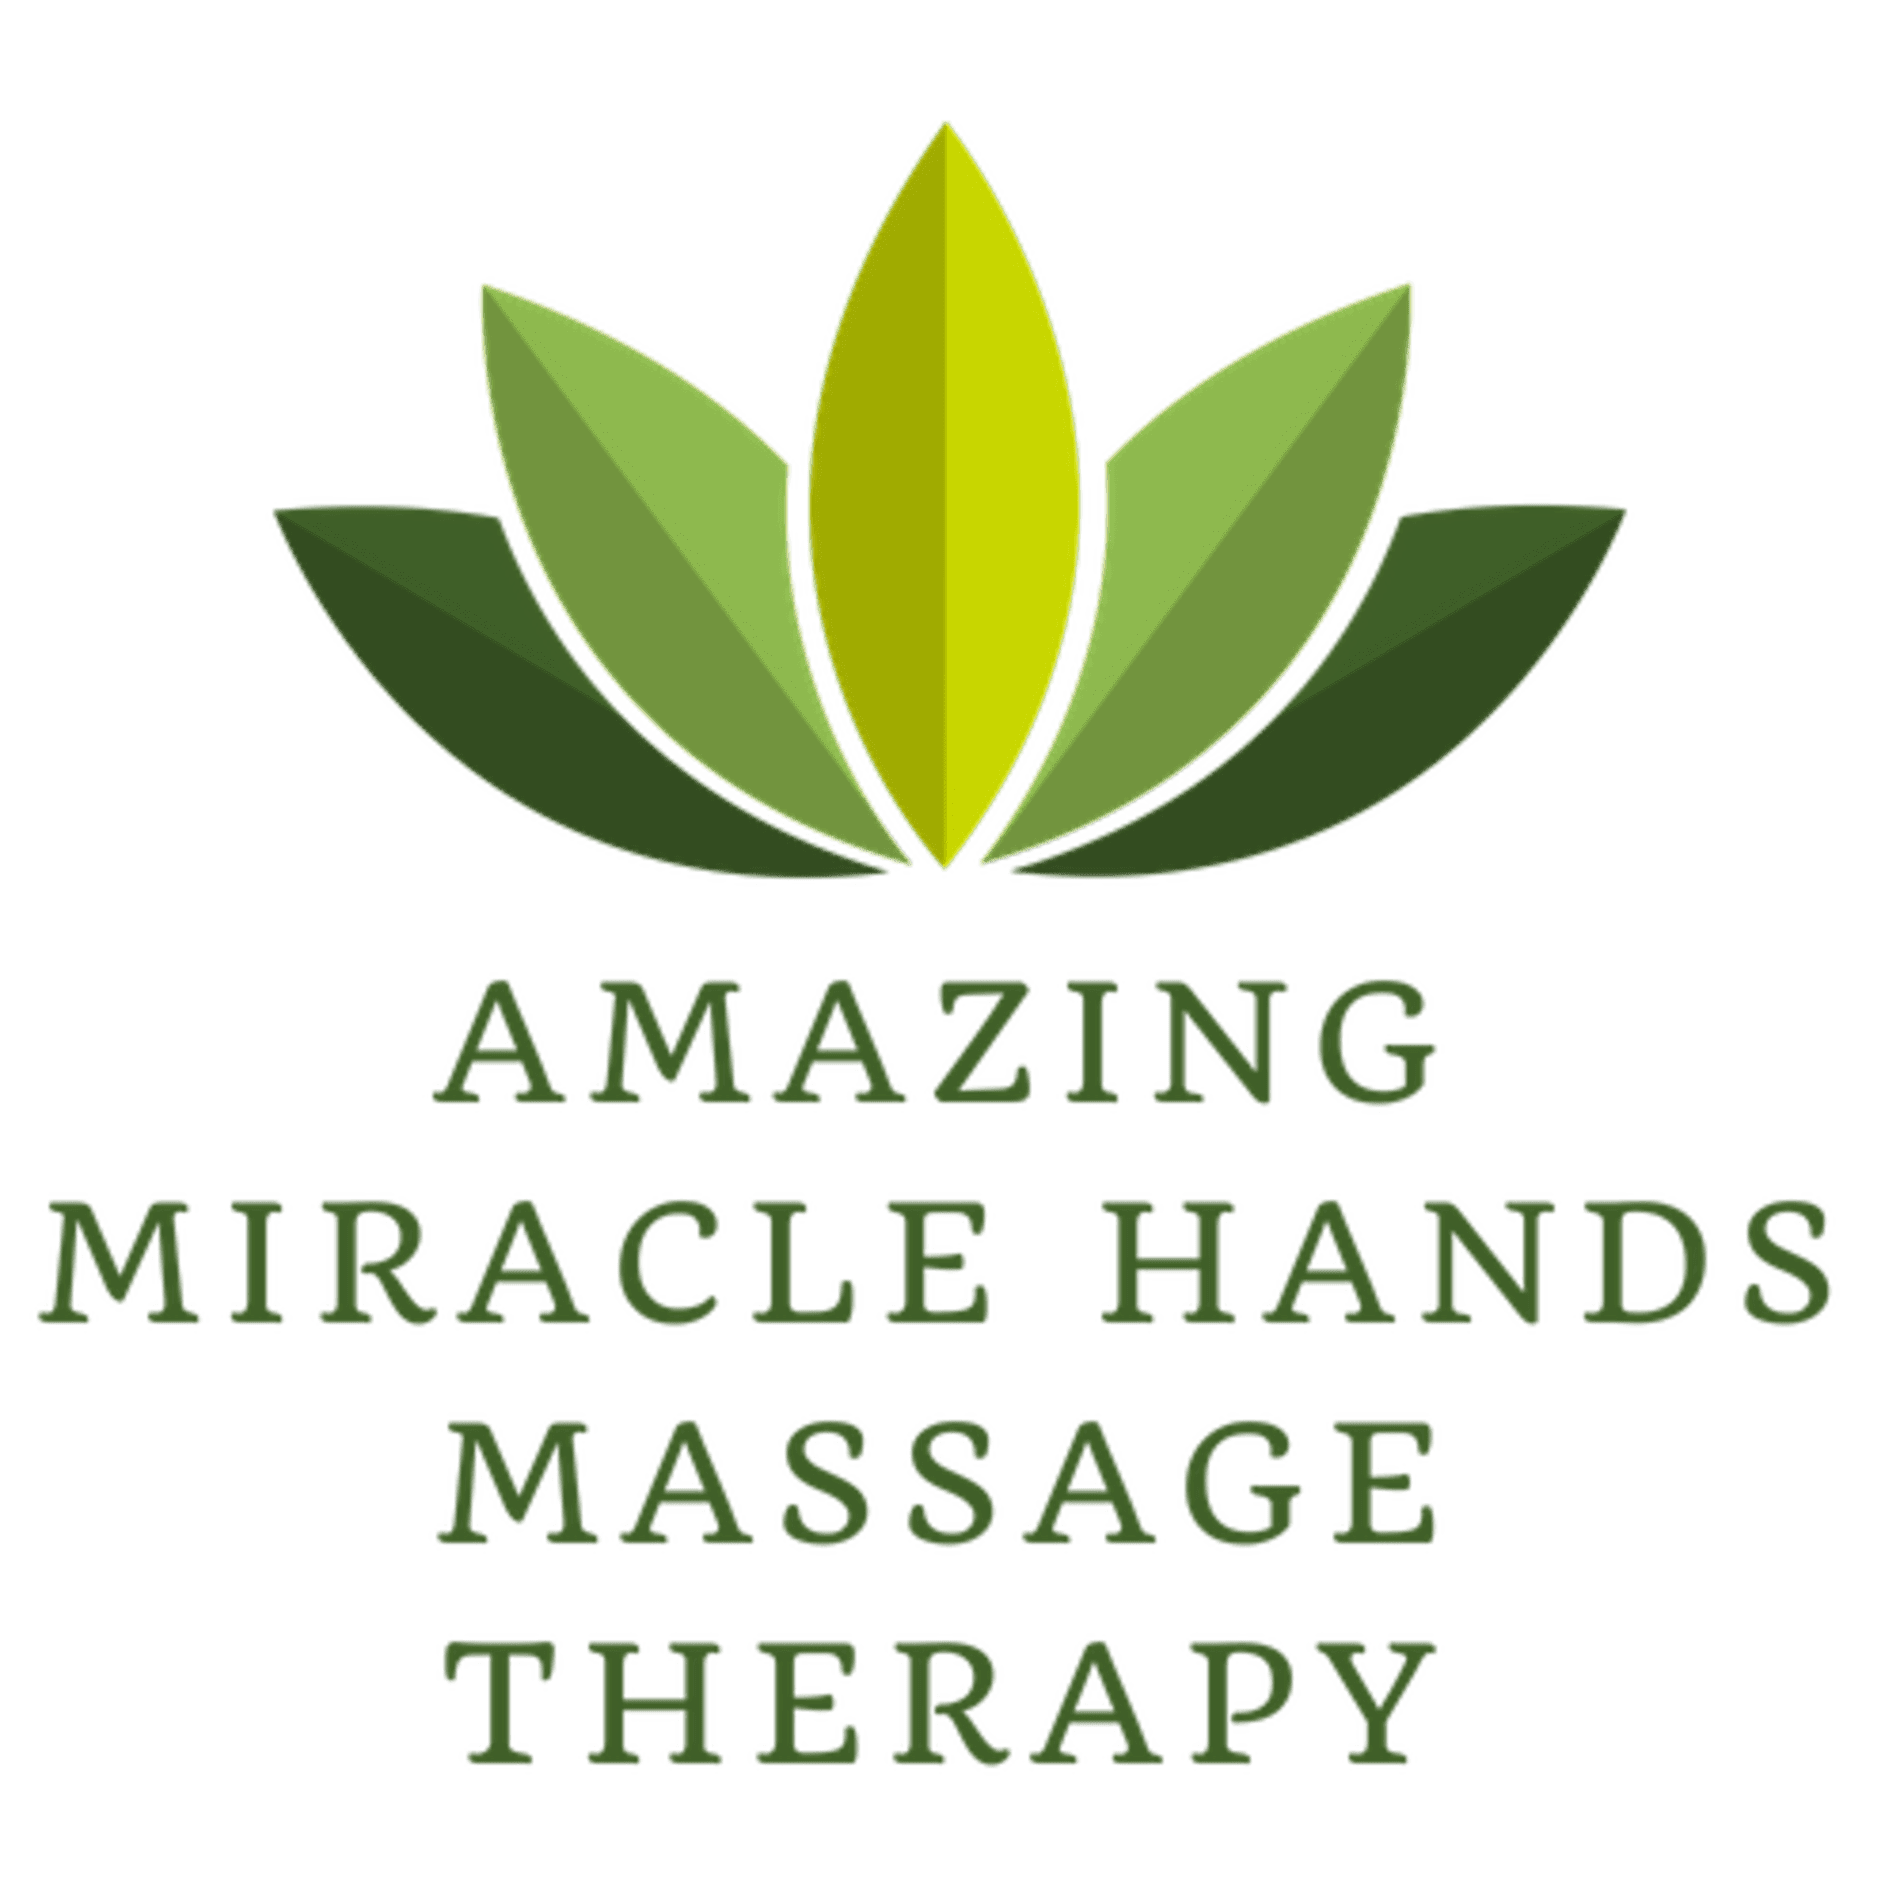 Amazing Miracle Hands Massage Therapy